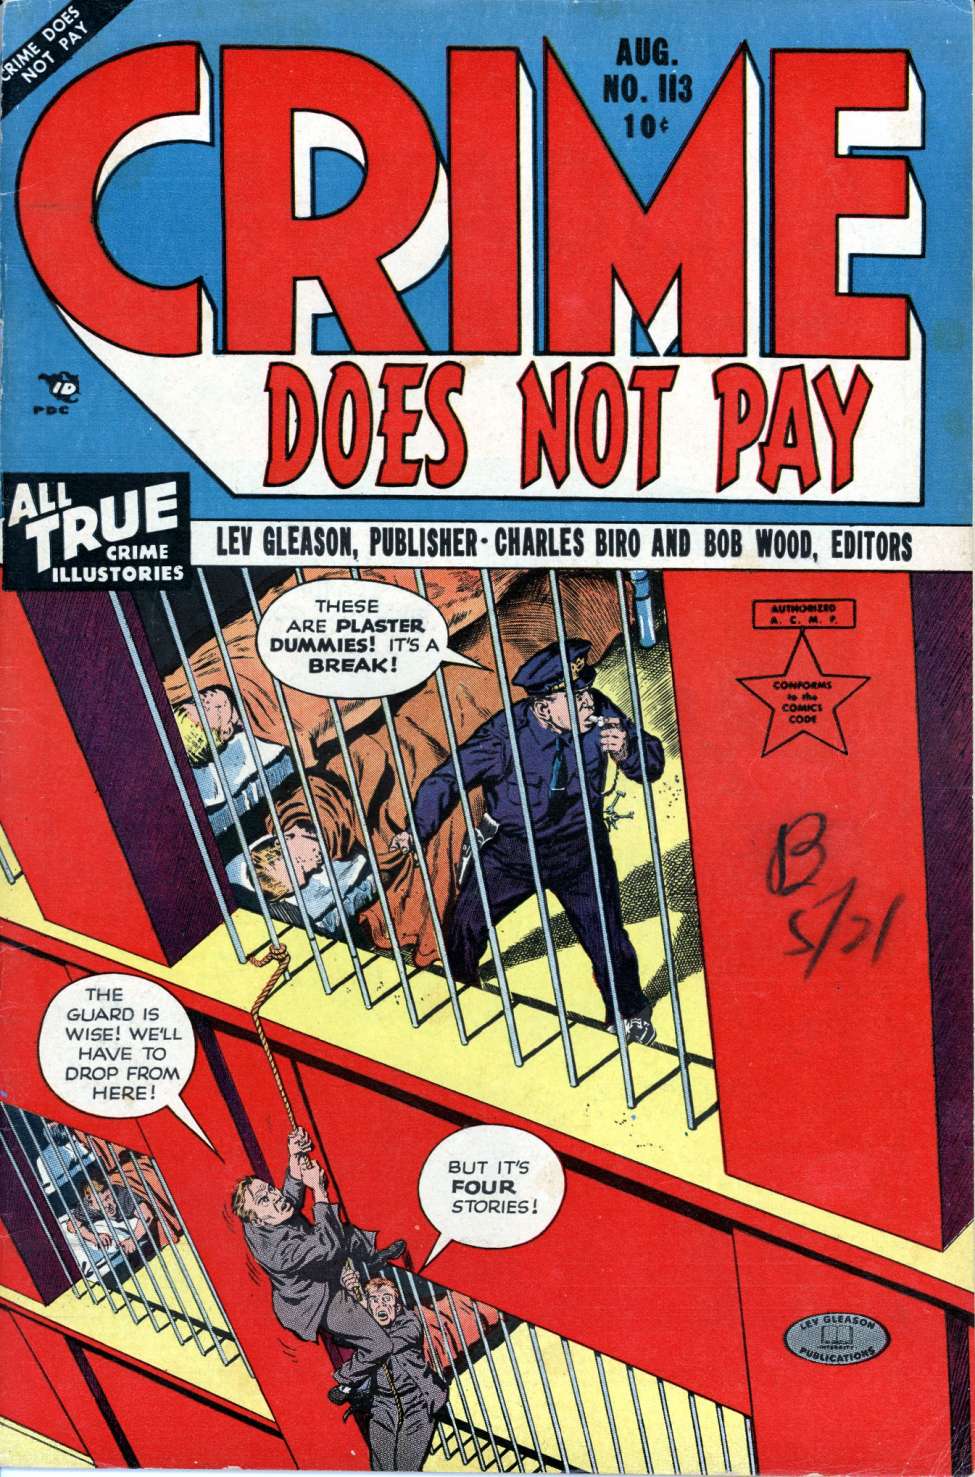 Book Cover For Crime Does Not Pay 113